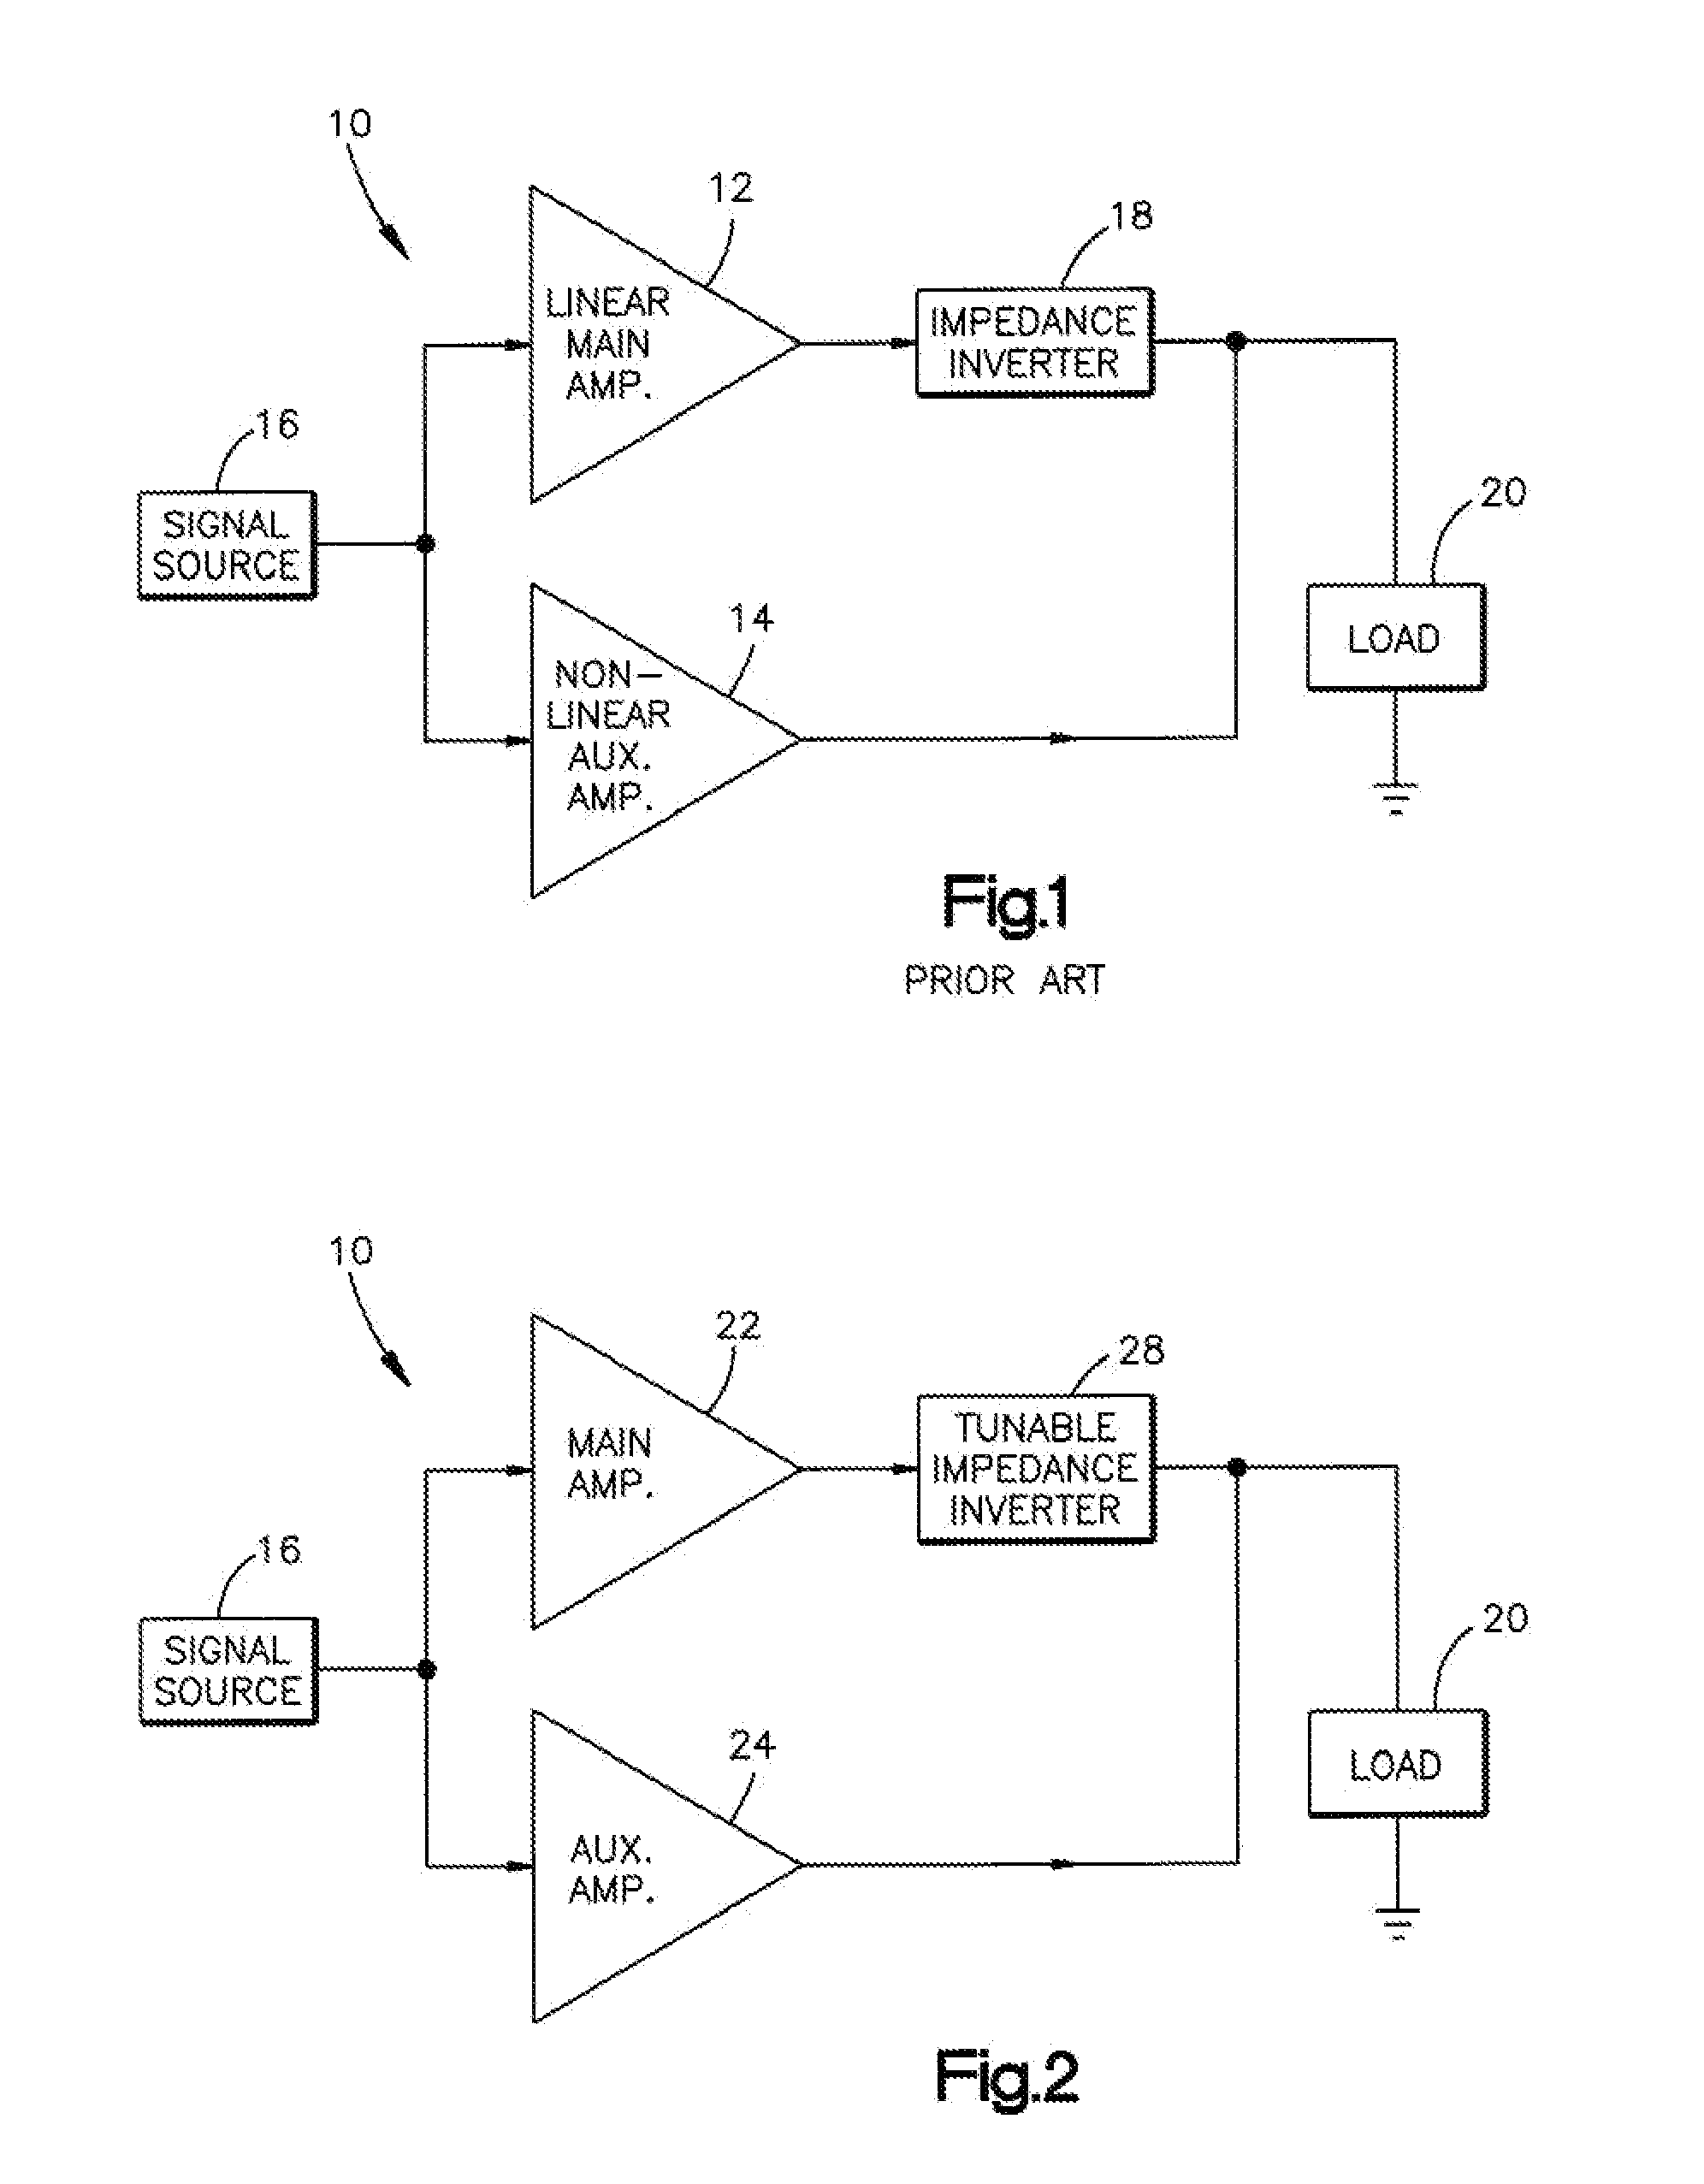 Tunable impedance inverter for doherty amplifier circuit